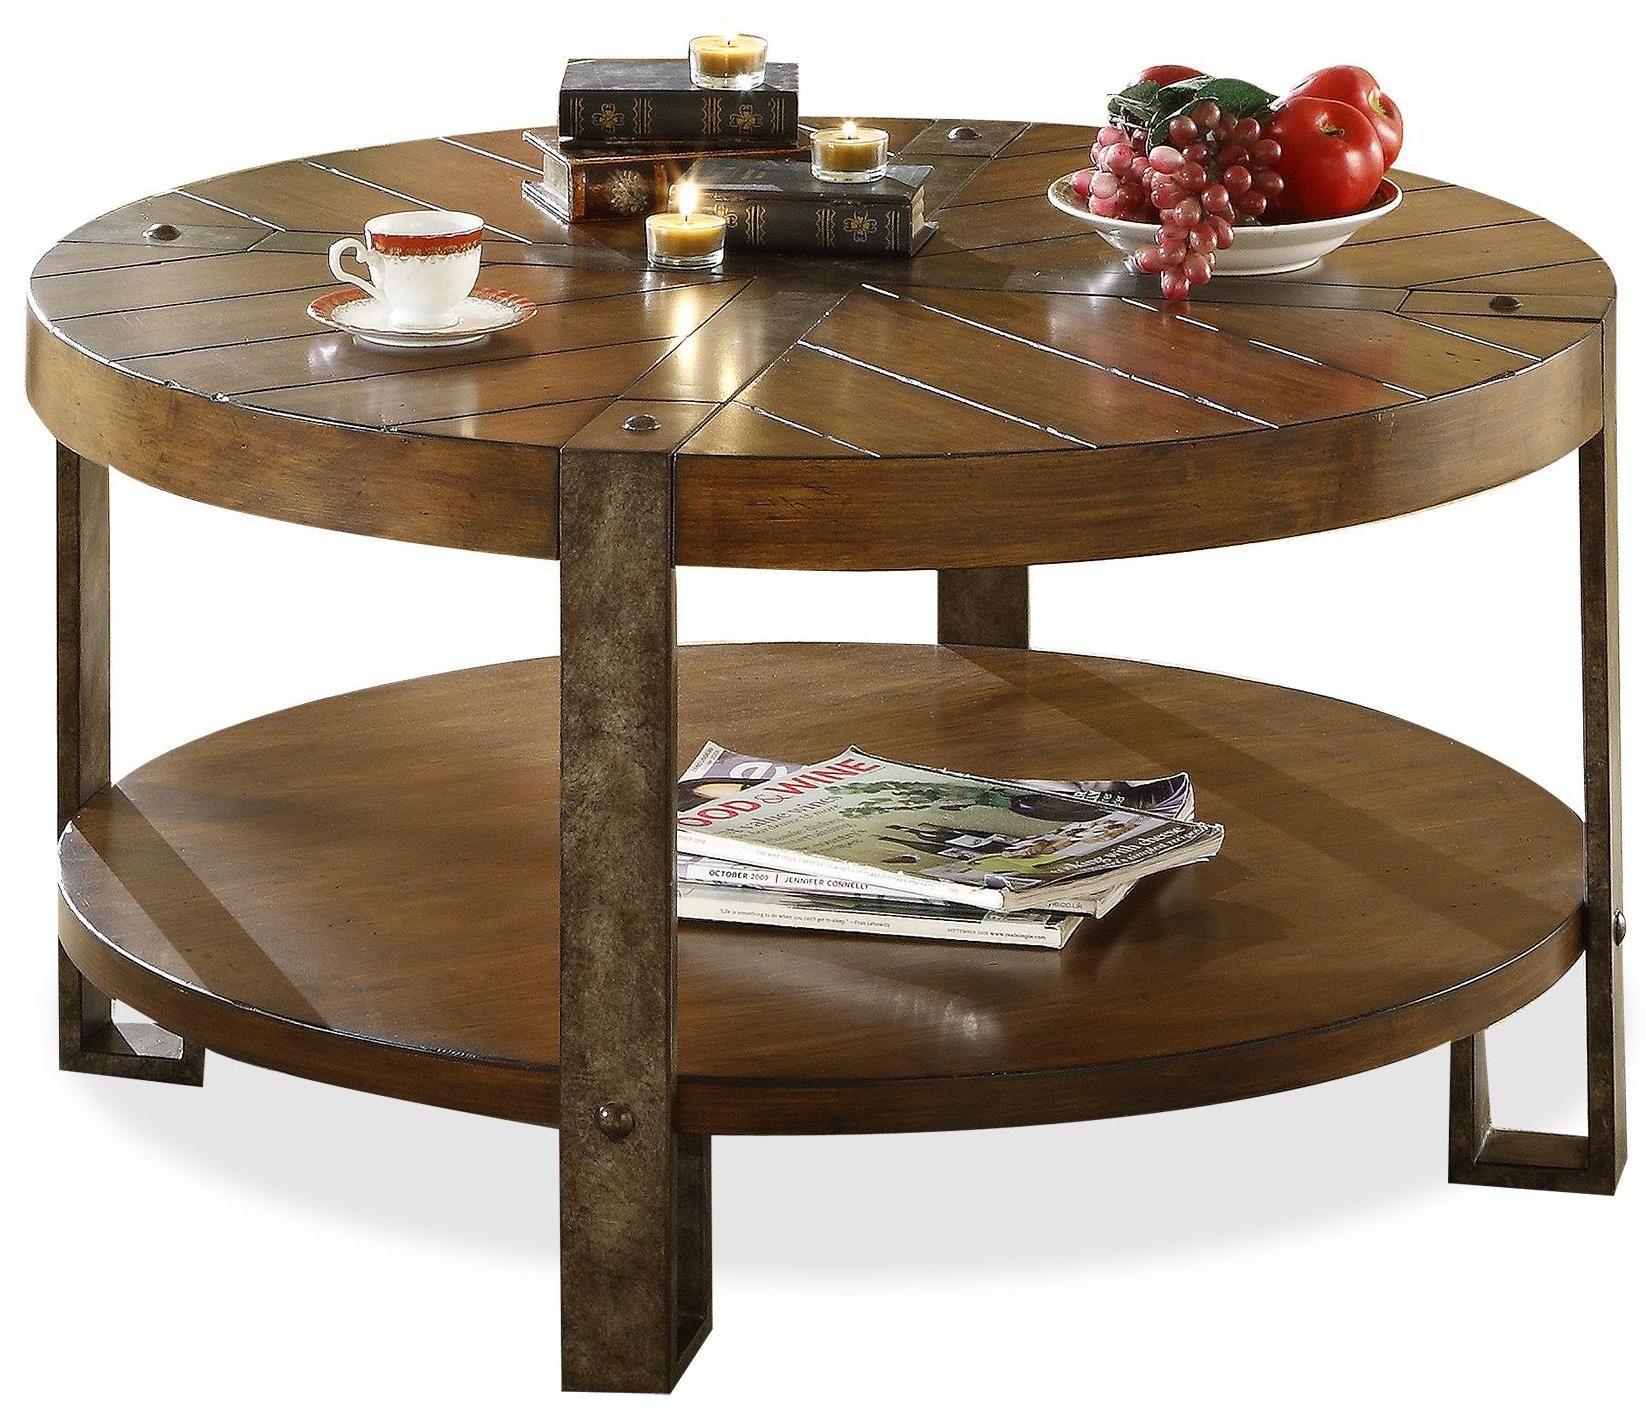 Awesome Round Coffee Tables With Storage | Homesfeed Regarding Coffee Tables For 4 6 People (View 9 of 15)